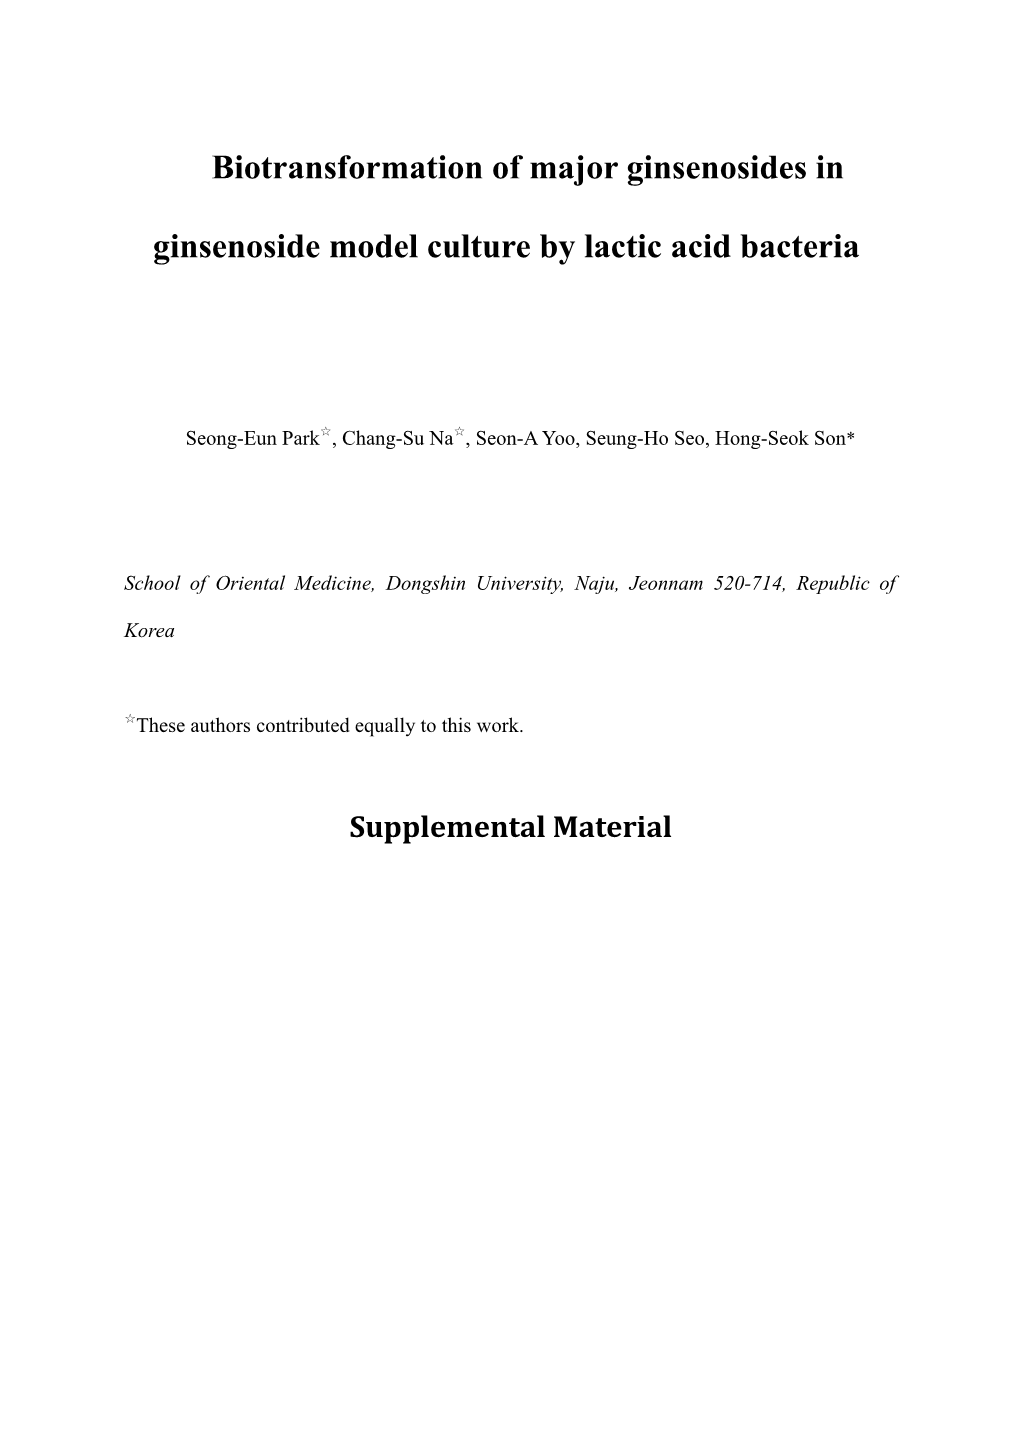 Biotransformation of Major Ginsenosides in Ginsenosidemodel Culture by Lactic Acid Bacteria